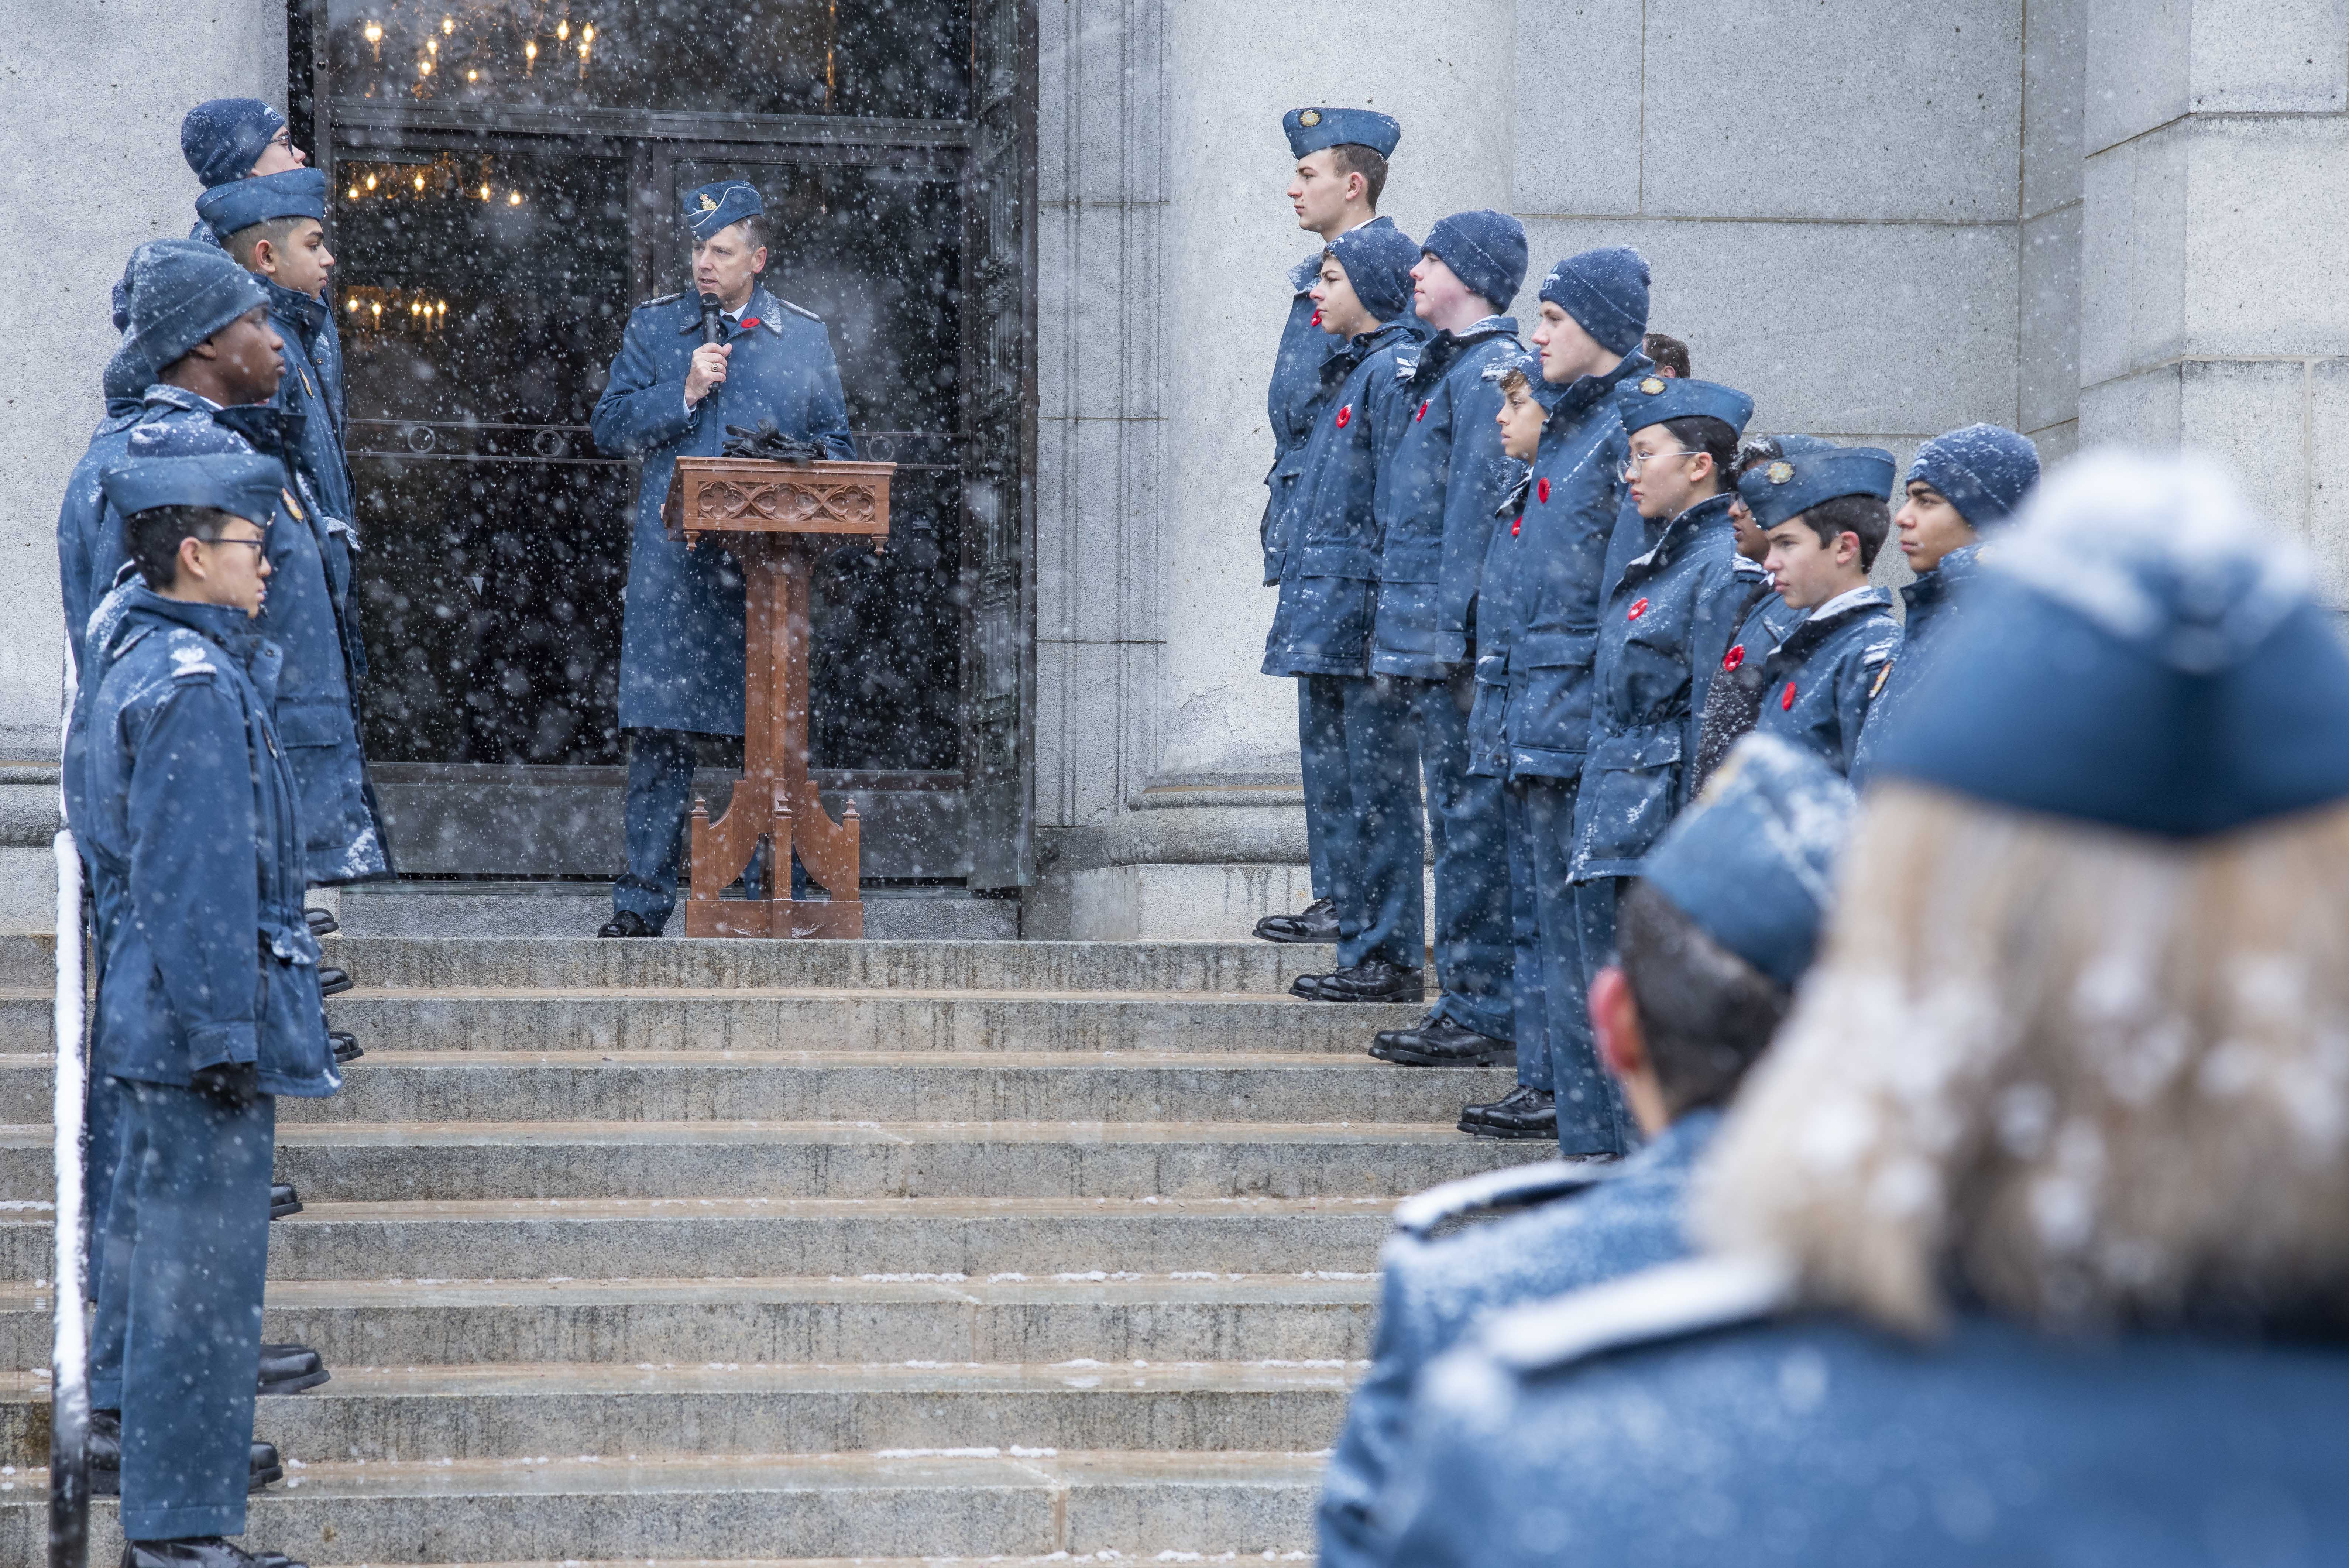 Lieutenant General Al Meinzinger, commander of the Royal Canadian Air Force, speaks during the 2019 Remembrance Day ceremony held at the mausoleum where Wing Commander William Barker, VC, is interred in Mount Pleasant Cemetery, Toronto. Royal Canadian Air Cadets line the steps leading up to the mausoleum. PHOTO: Corporal Lynette Ai Dang, BM10-2019-0359-016